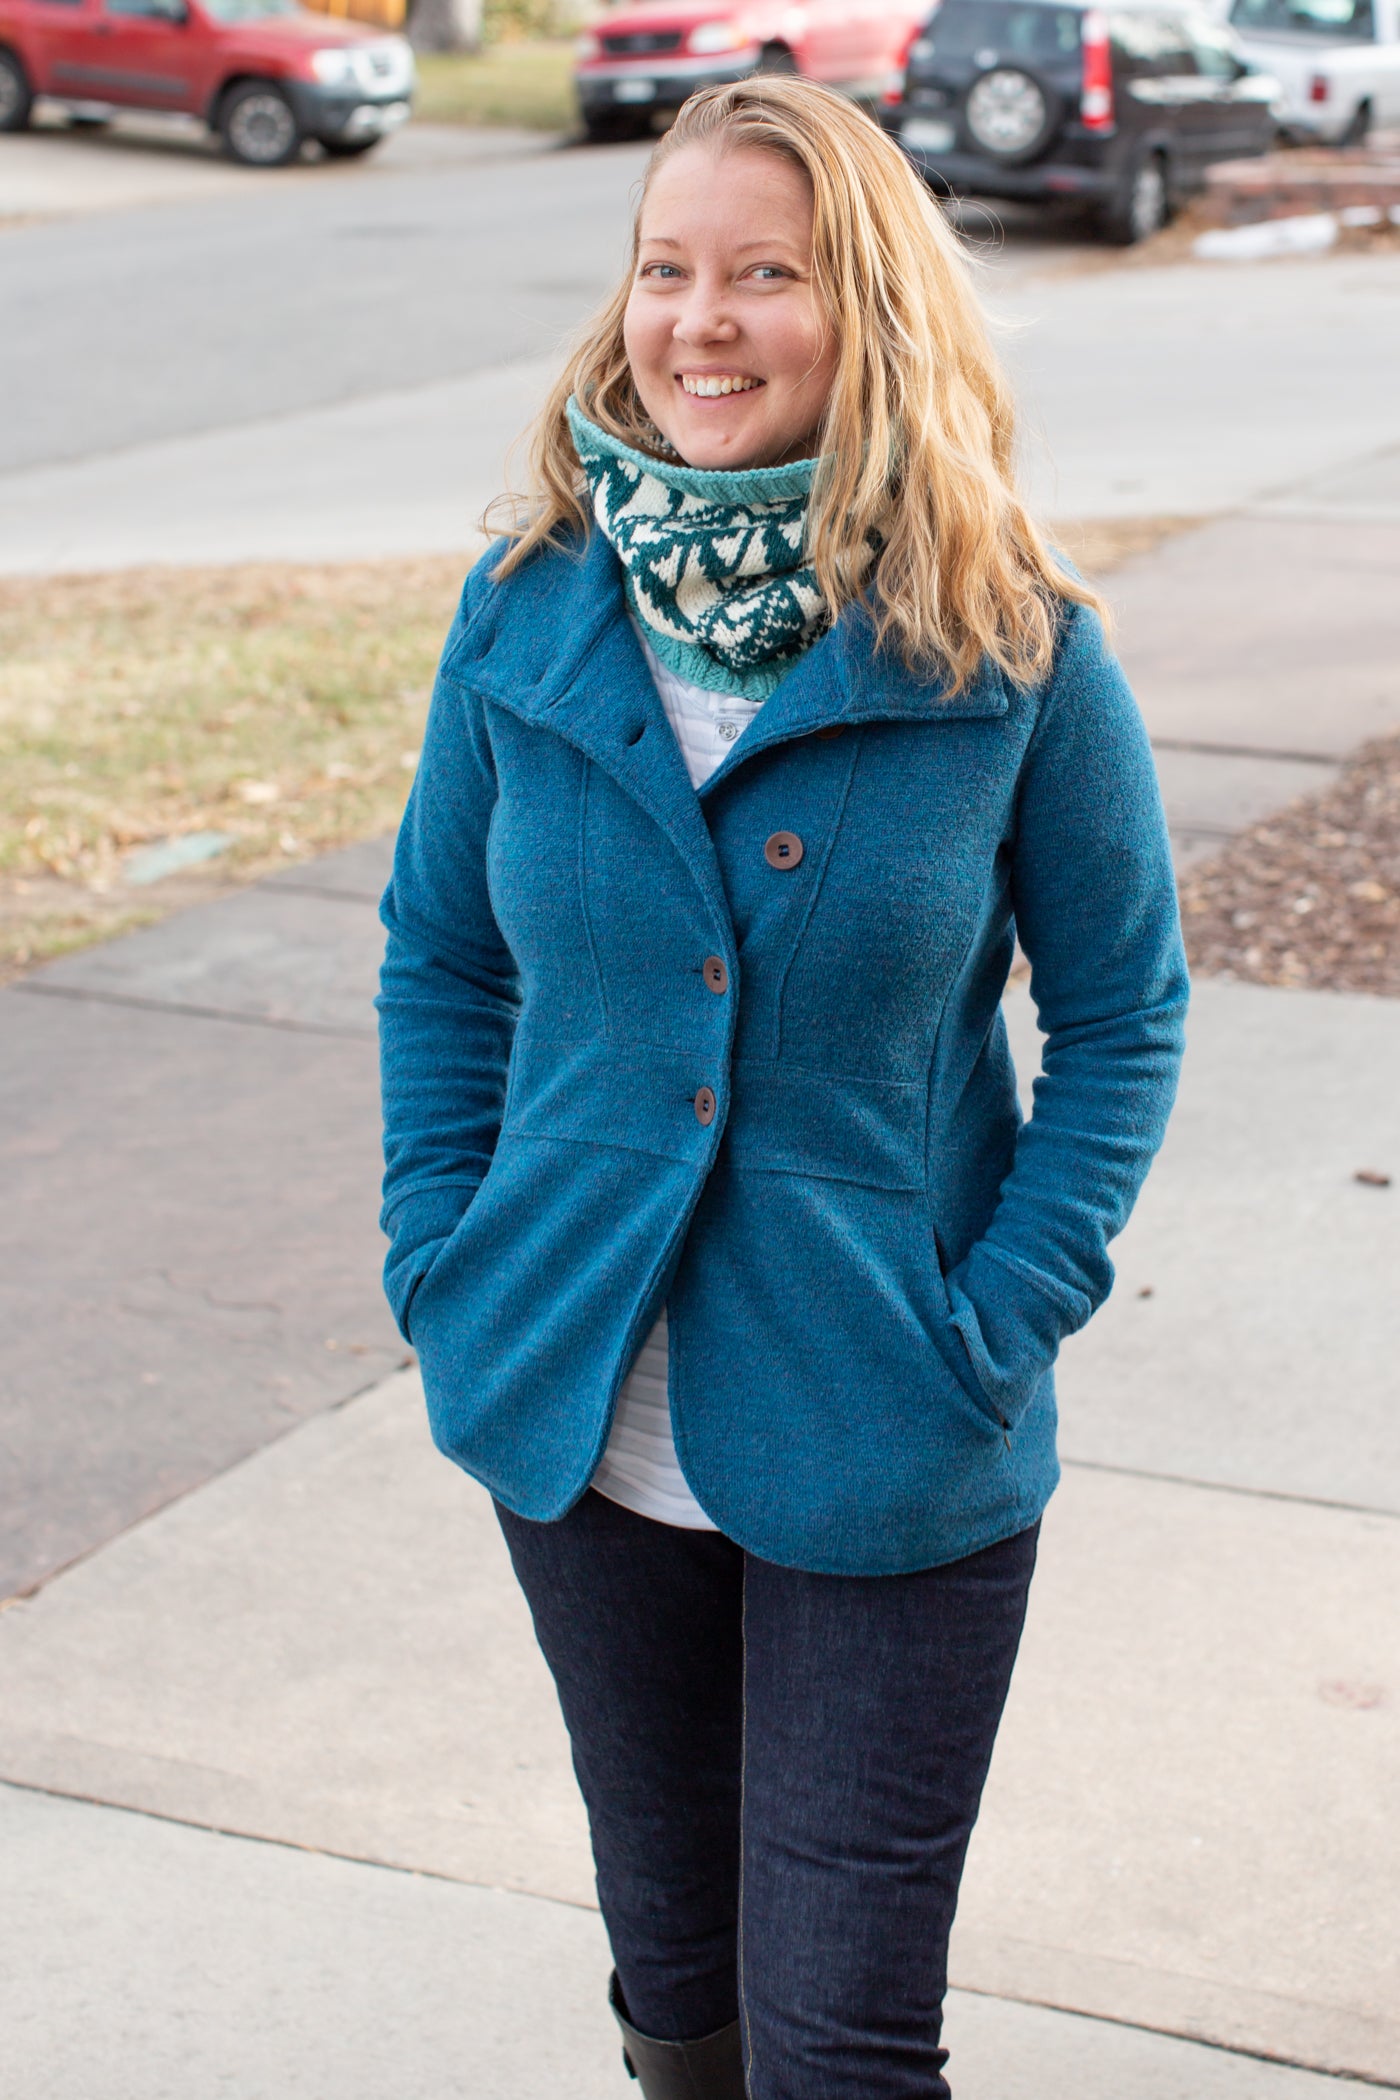 Danielle walking down a city sidewalk smiling.  Danielle is in a dark sky blue peacoat with her hand in her pockets.  With a white, turquoise and teal cowl around her neck.